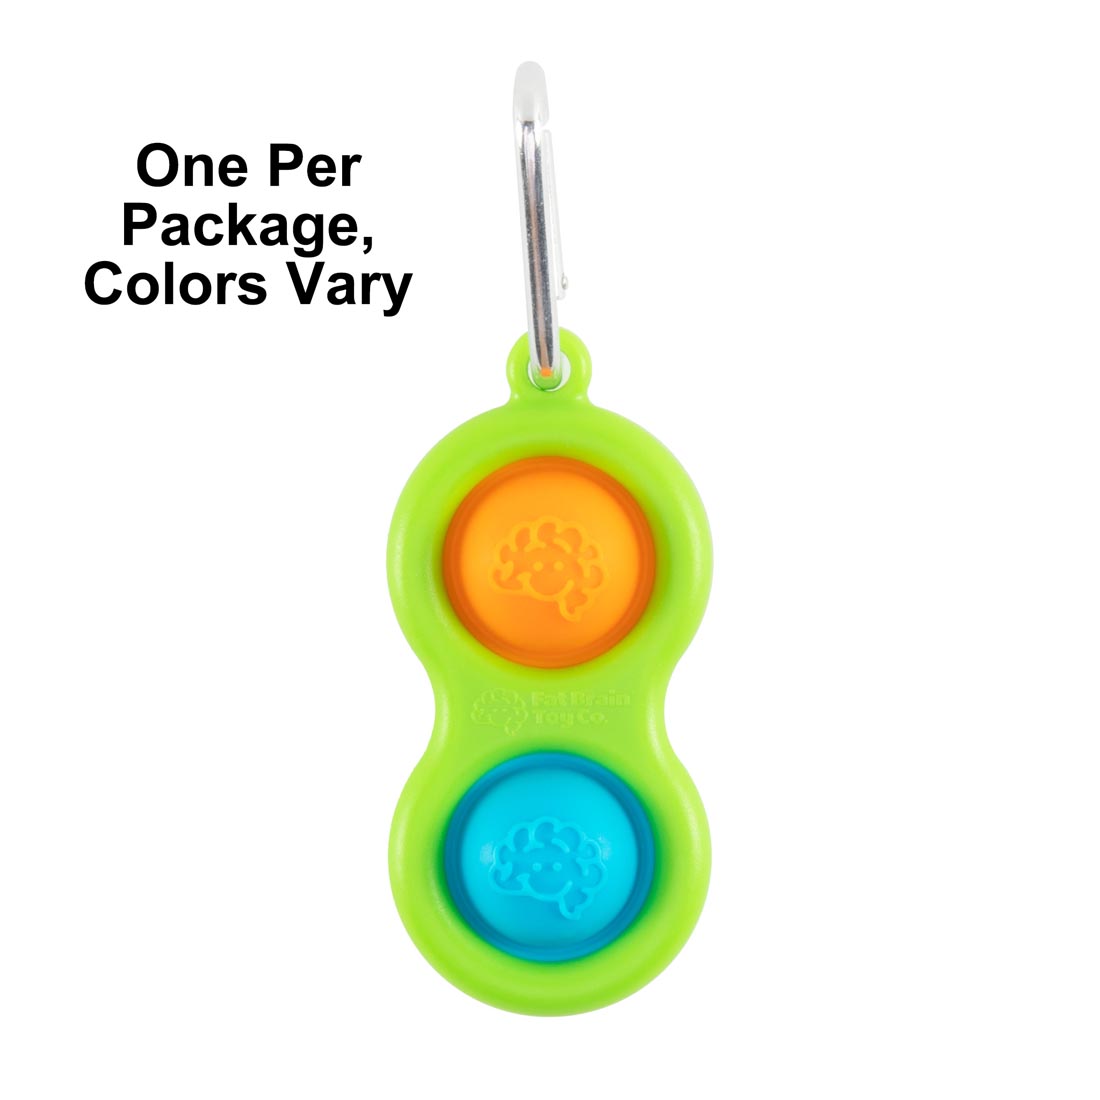 Colorful Simpl Dimpl with the text One Per Package, Colors Vary